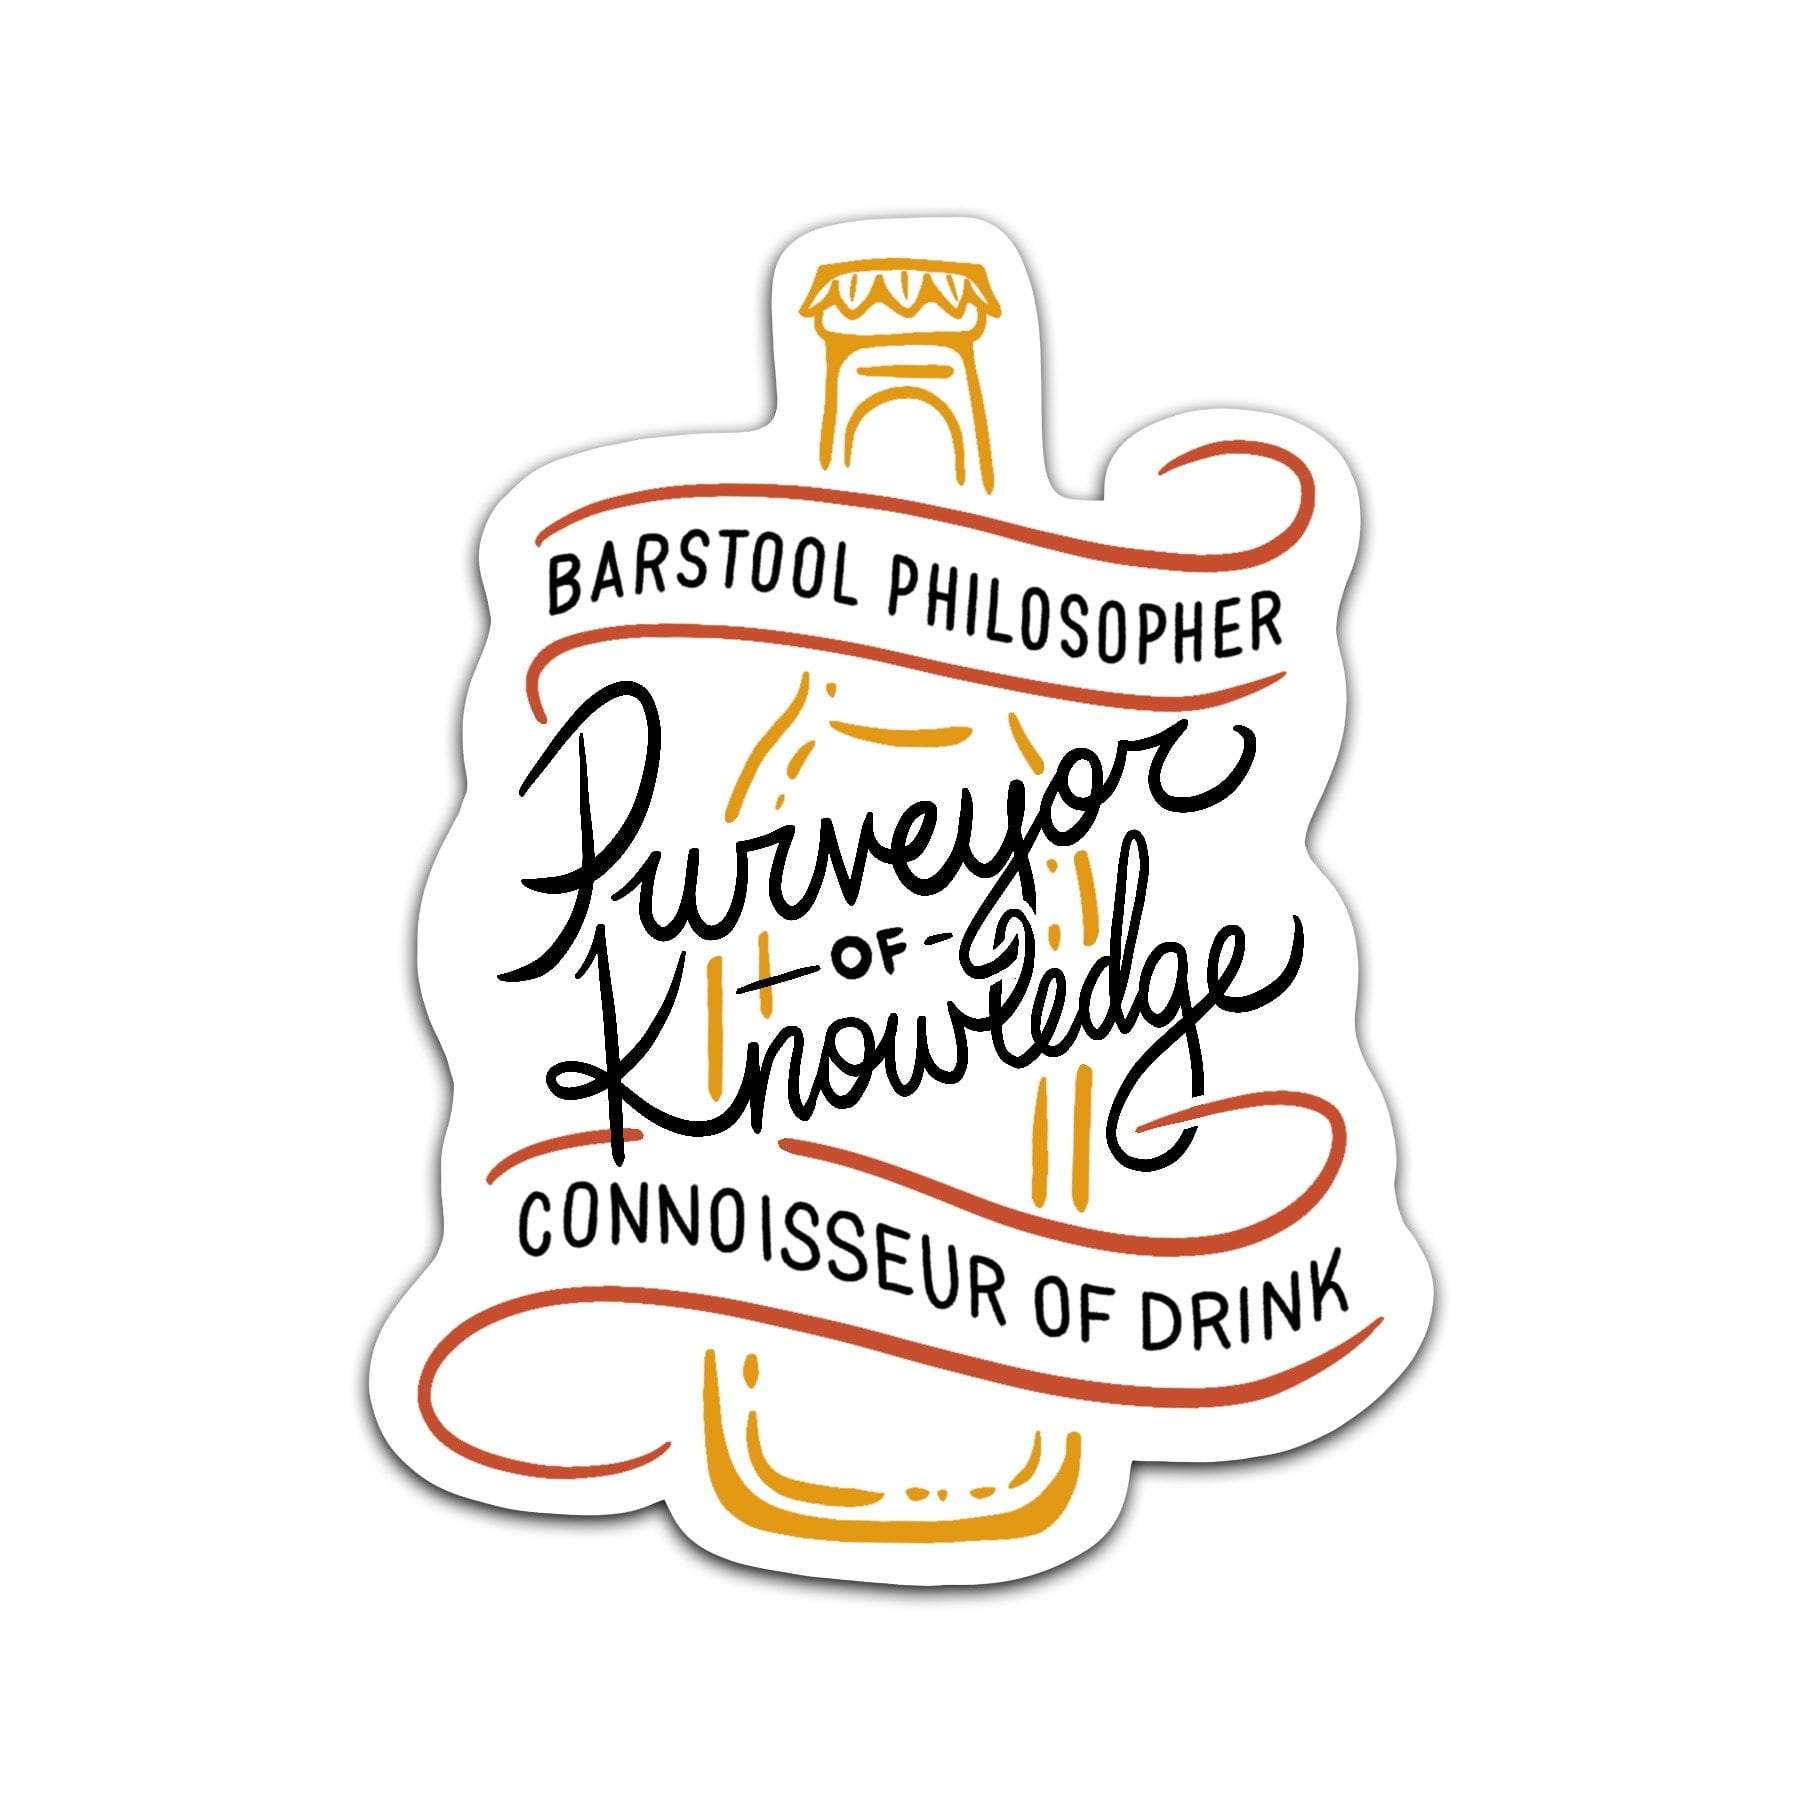 Torched Products Stickers Barstool Philospher - Vinyl Sticker